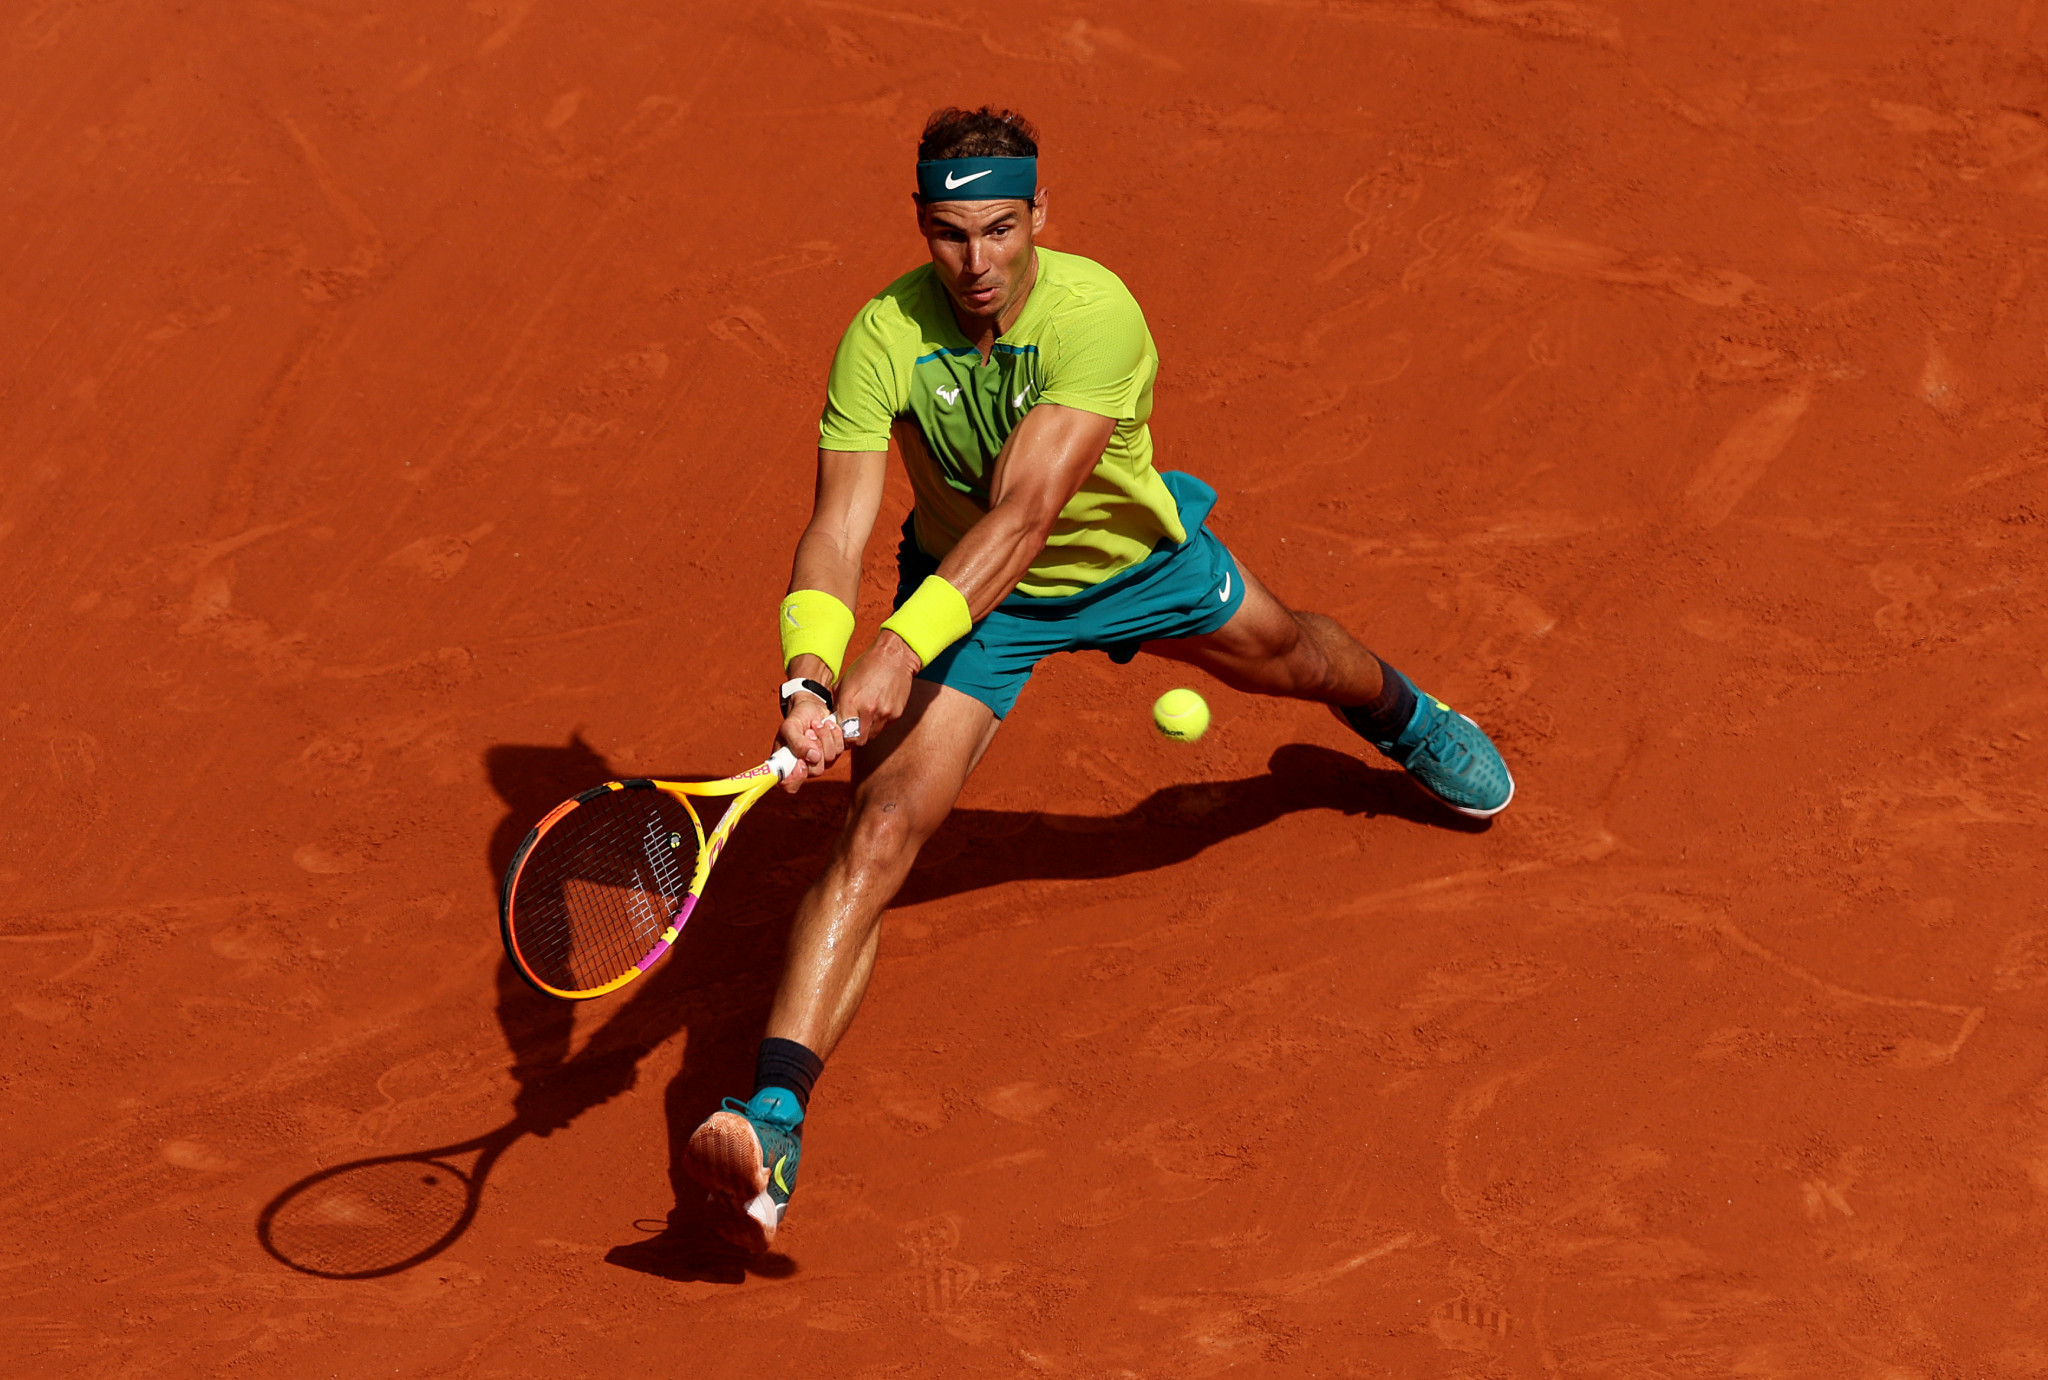 Rafael Nadal has been tipped to win his second Olympic singles title as the tournament is due to be played on clay for the first time since 1992 ©Getty Images